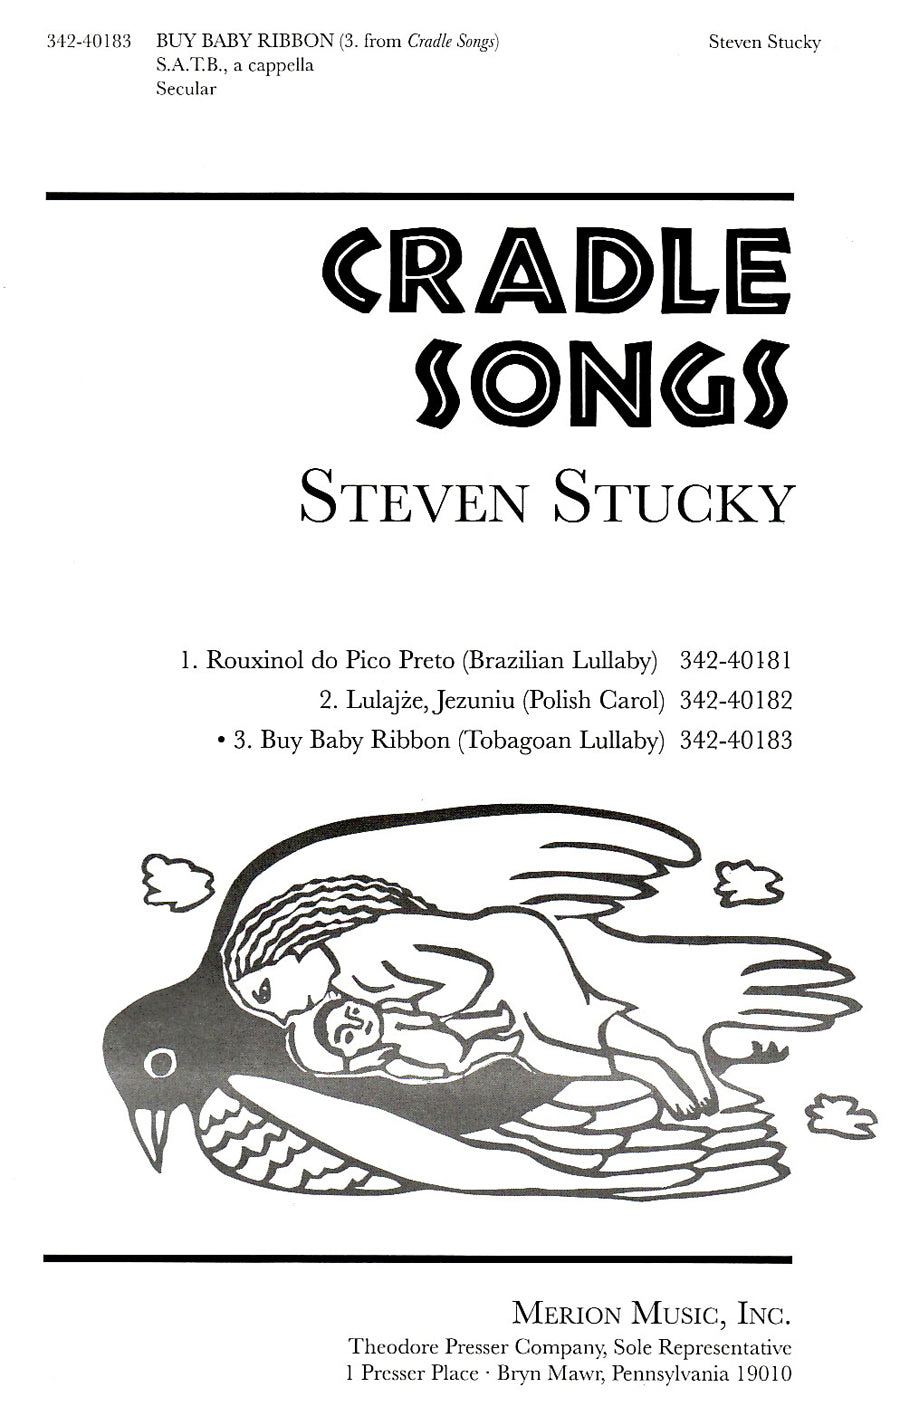 Stucky: Buy Baby Ribbon from Cradle Songs